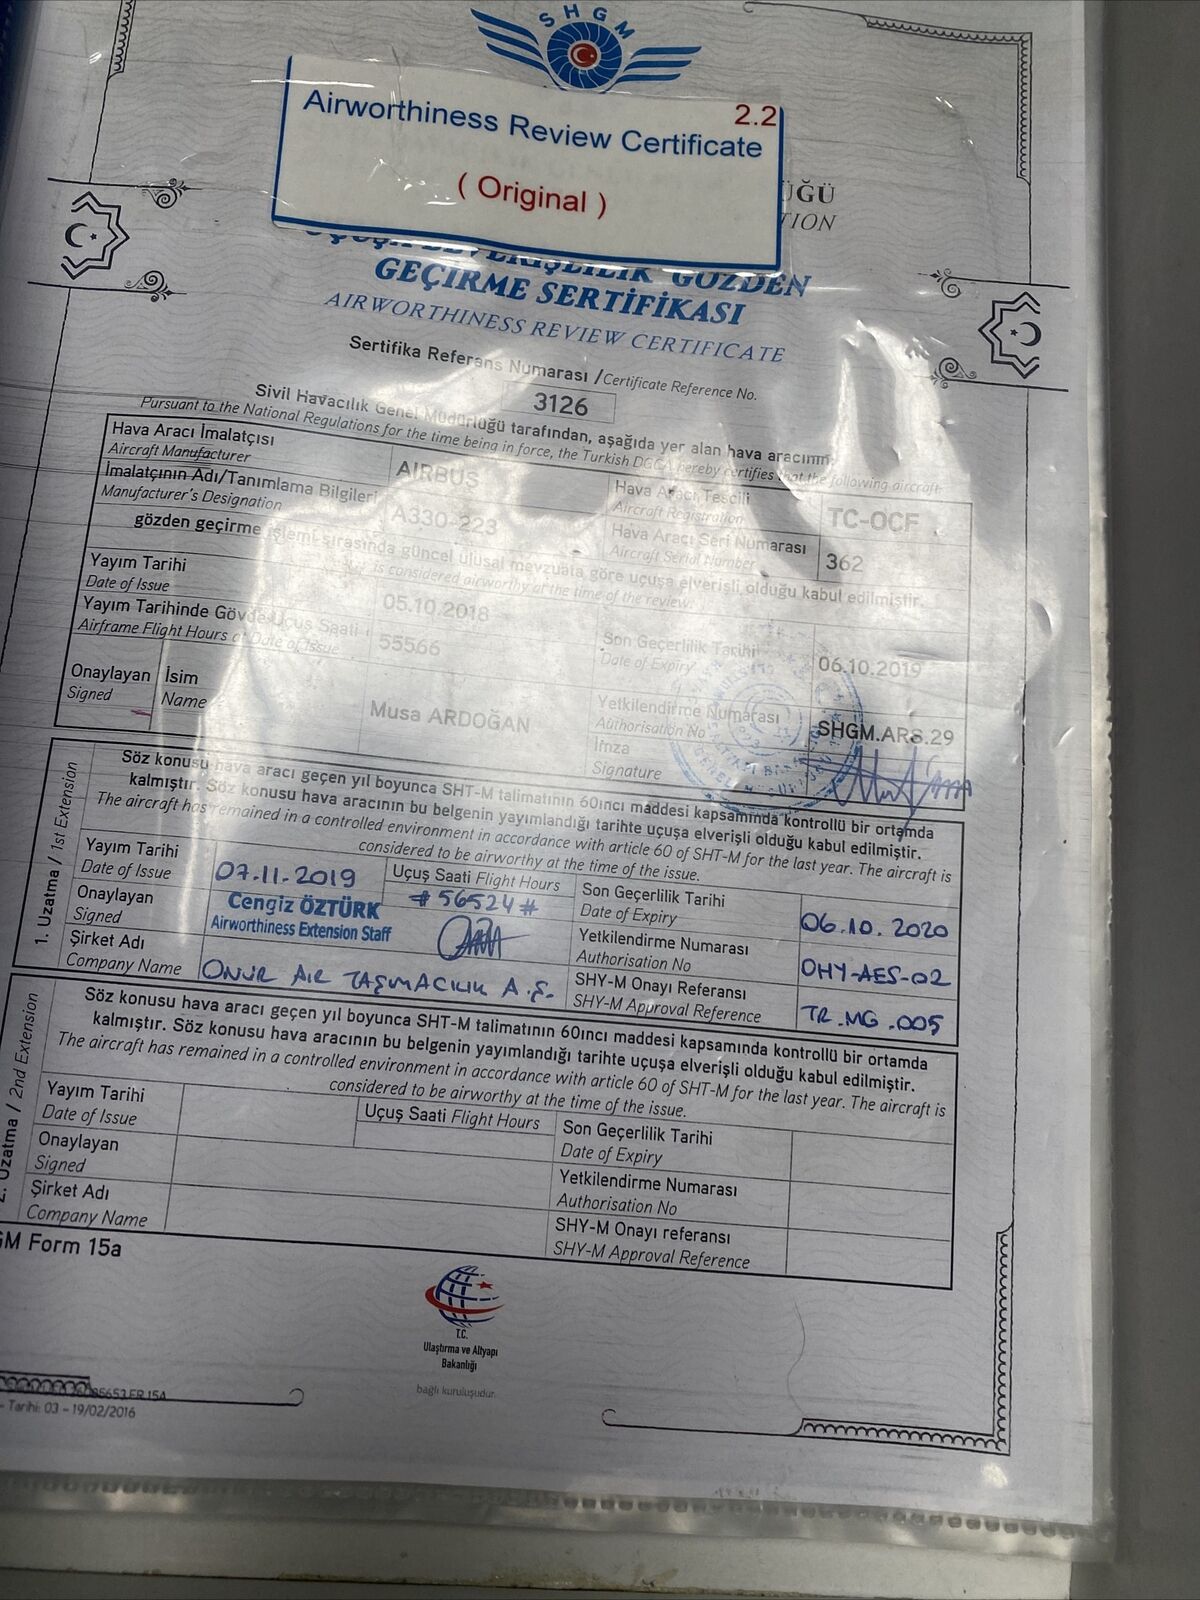 Original A330-200 Onur Air "True Certified Copy of Carry on Documents, Manuals"